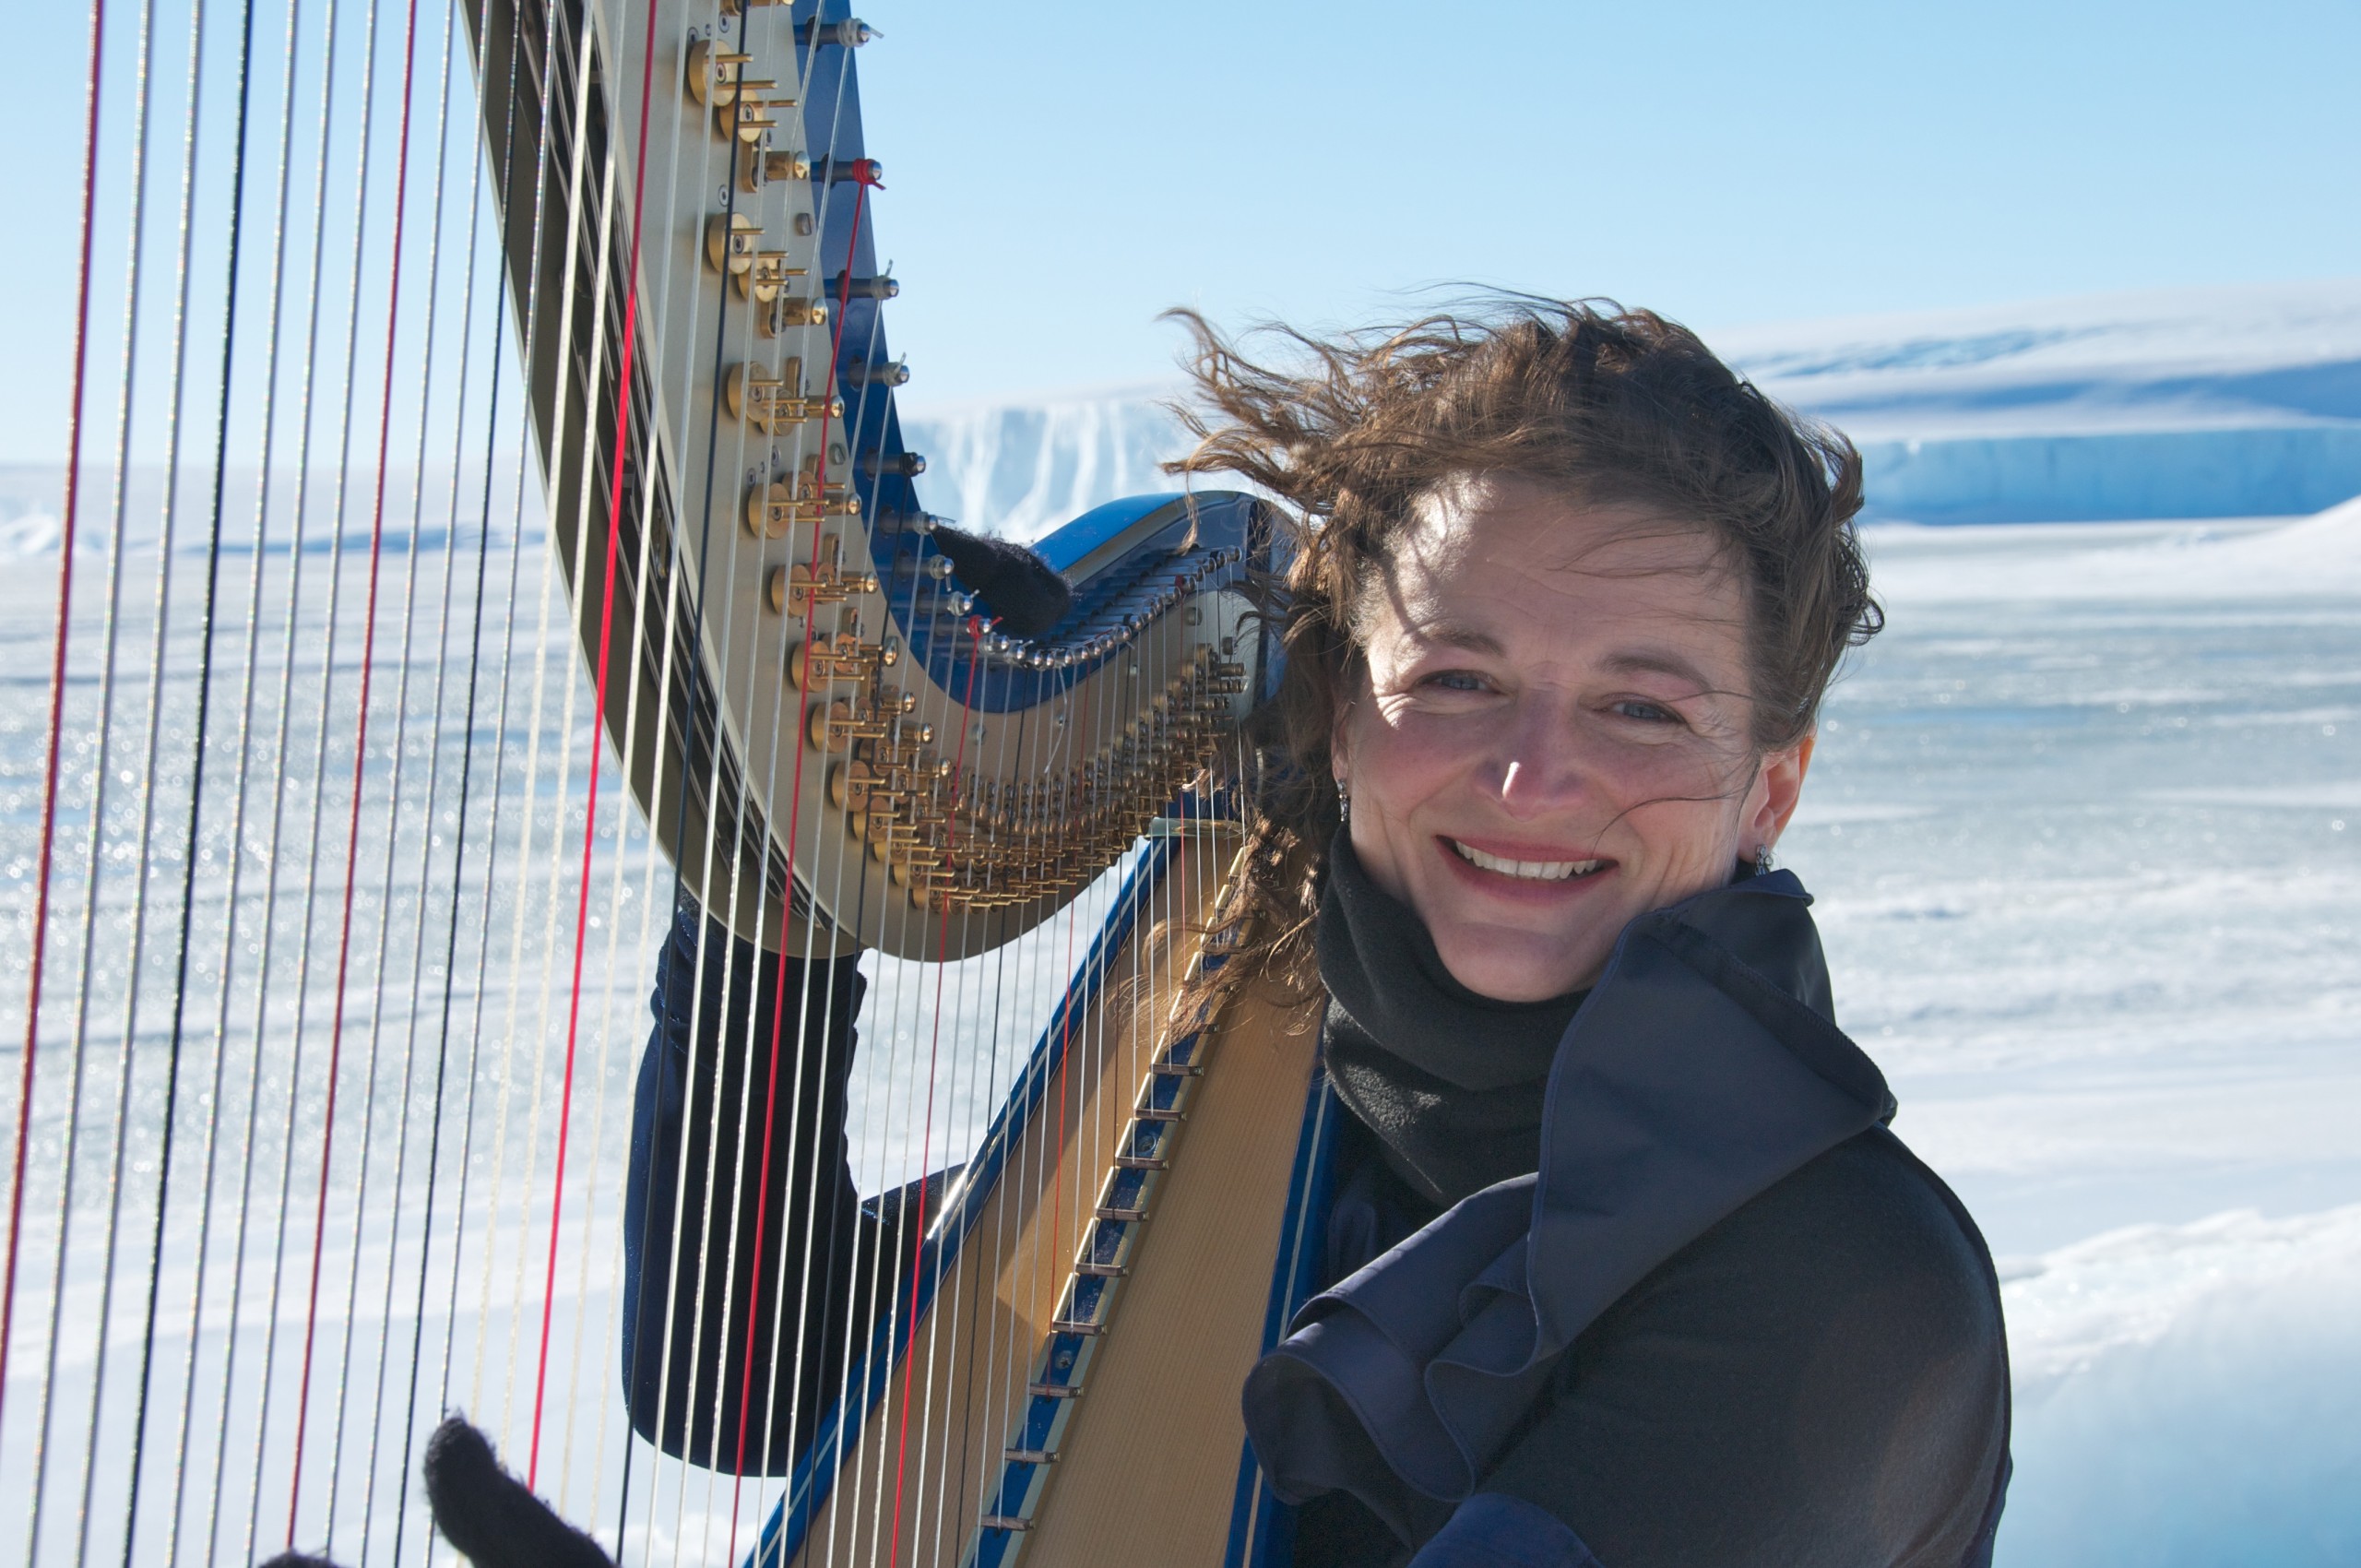 Alice Giles with her harp on snow